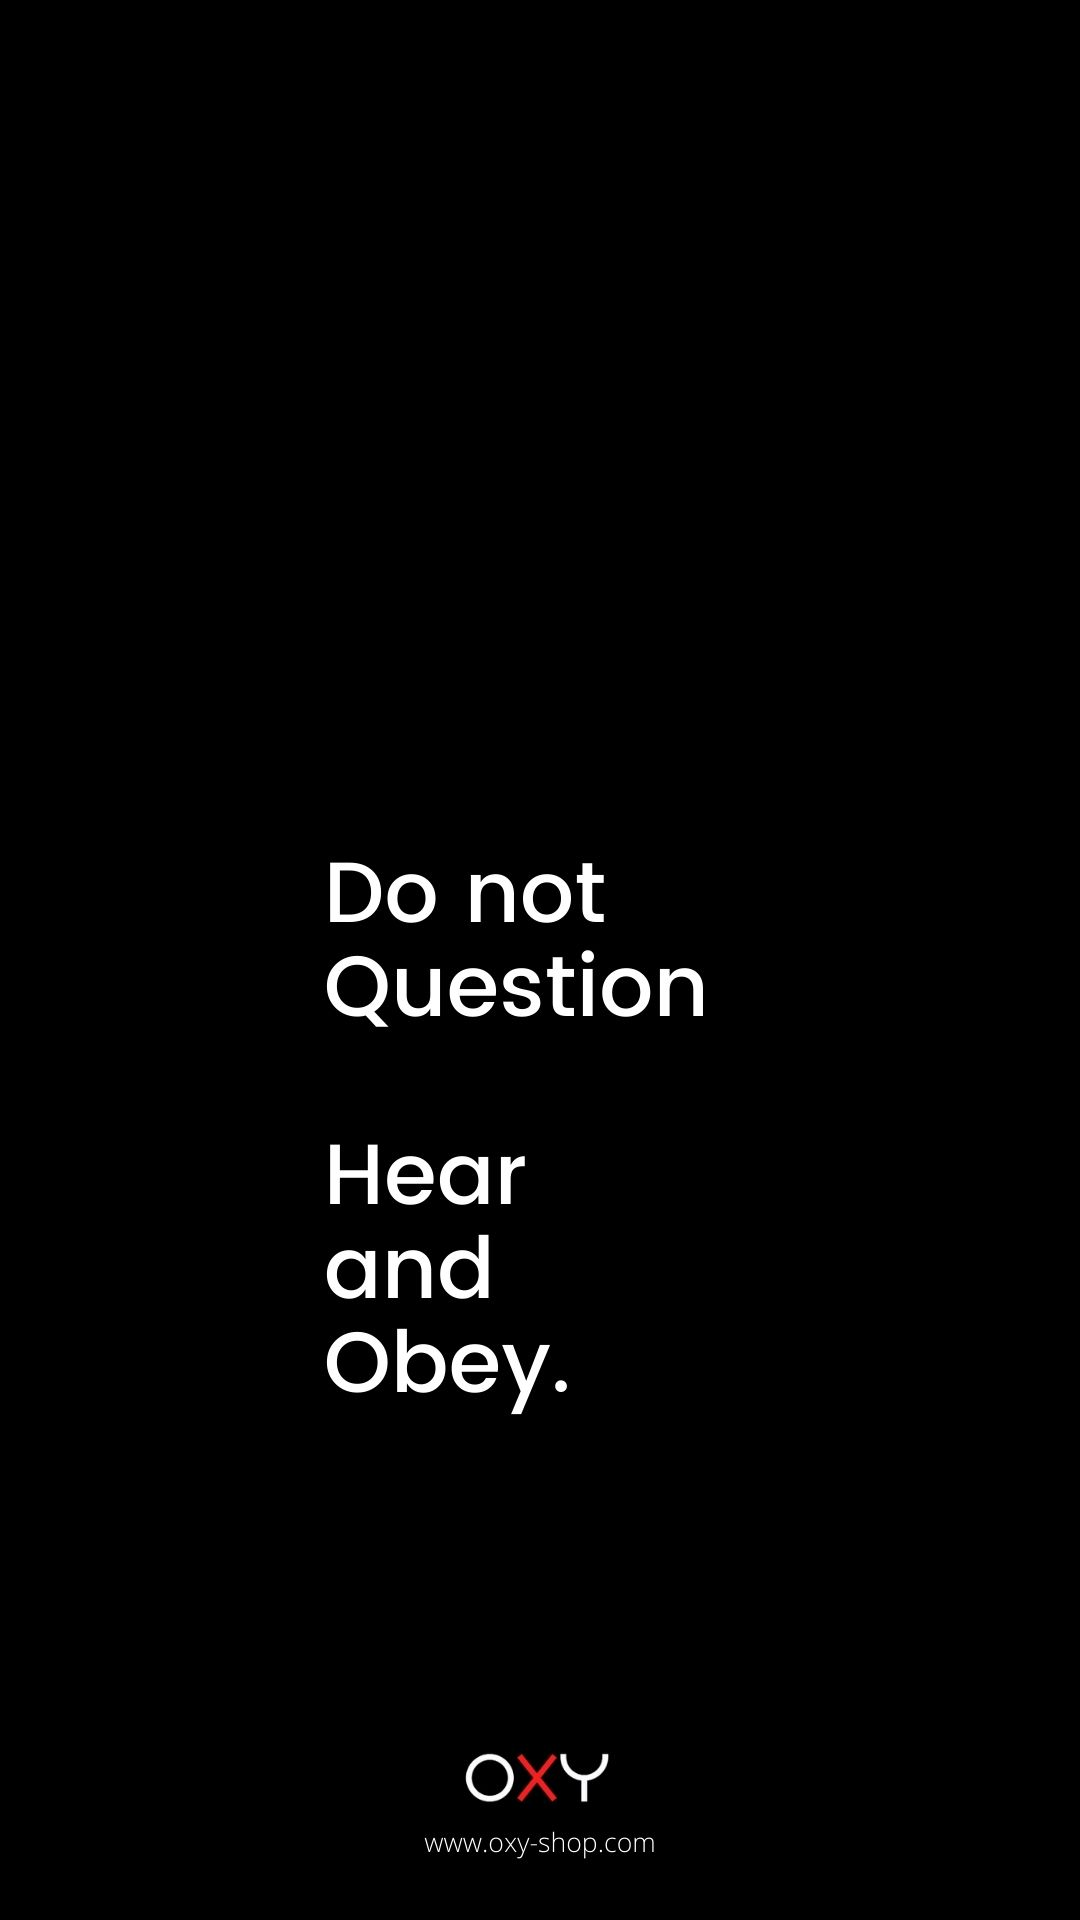 Do not question Hear and Obey. - BDSM wallpaper